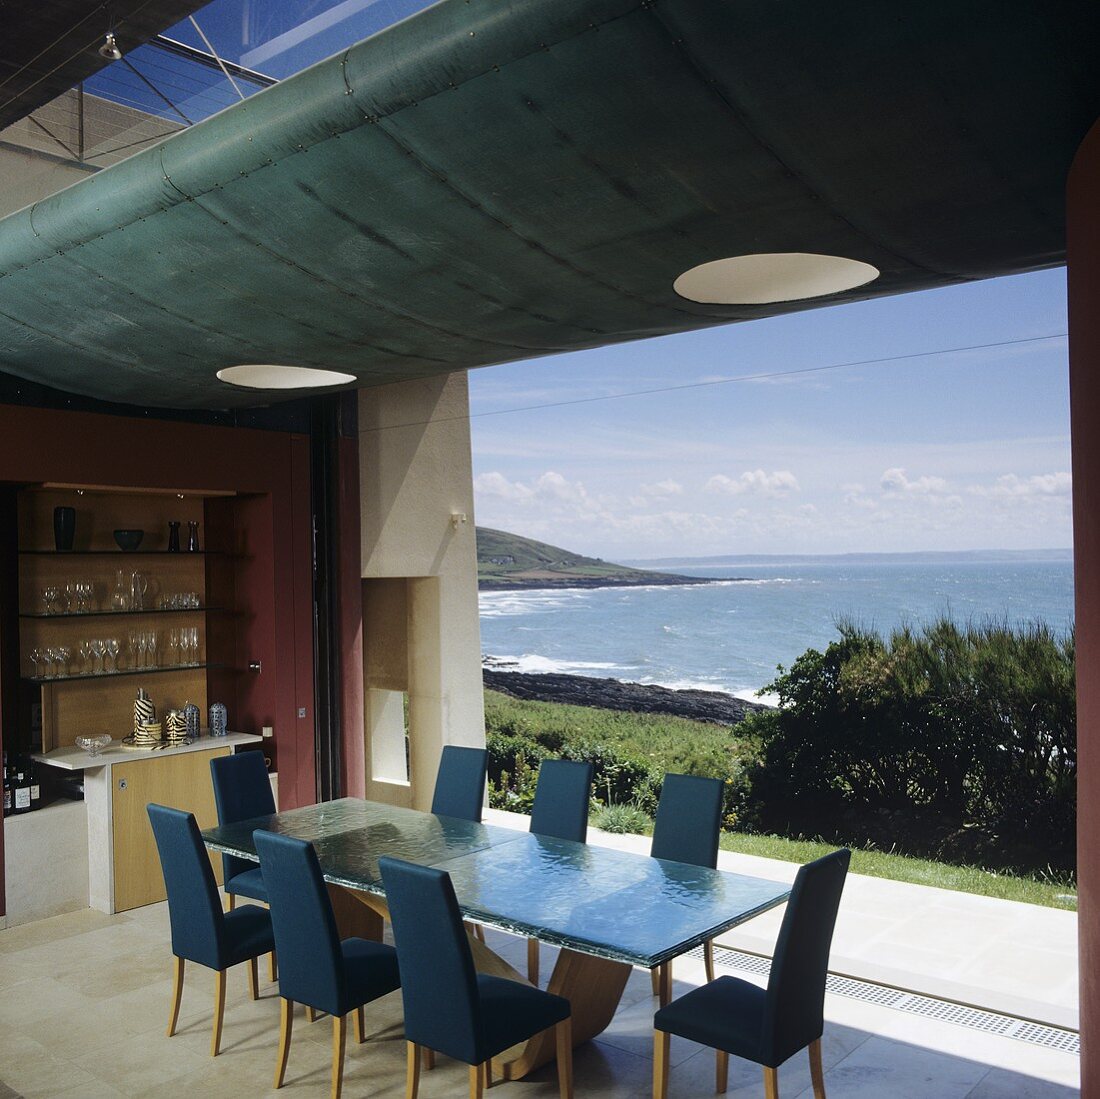 Dining area in front of a wall of window with a fantastic view of the ocean